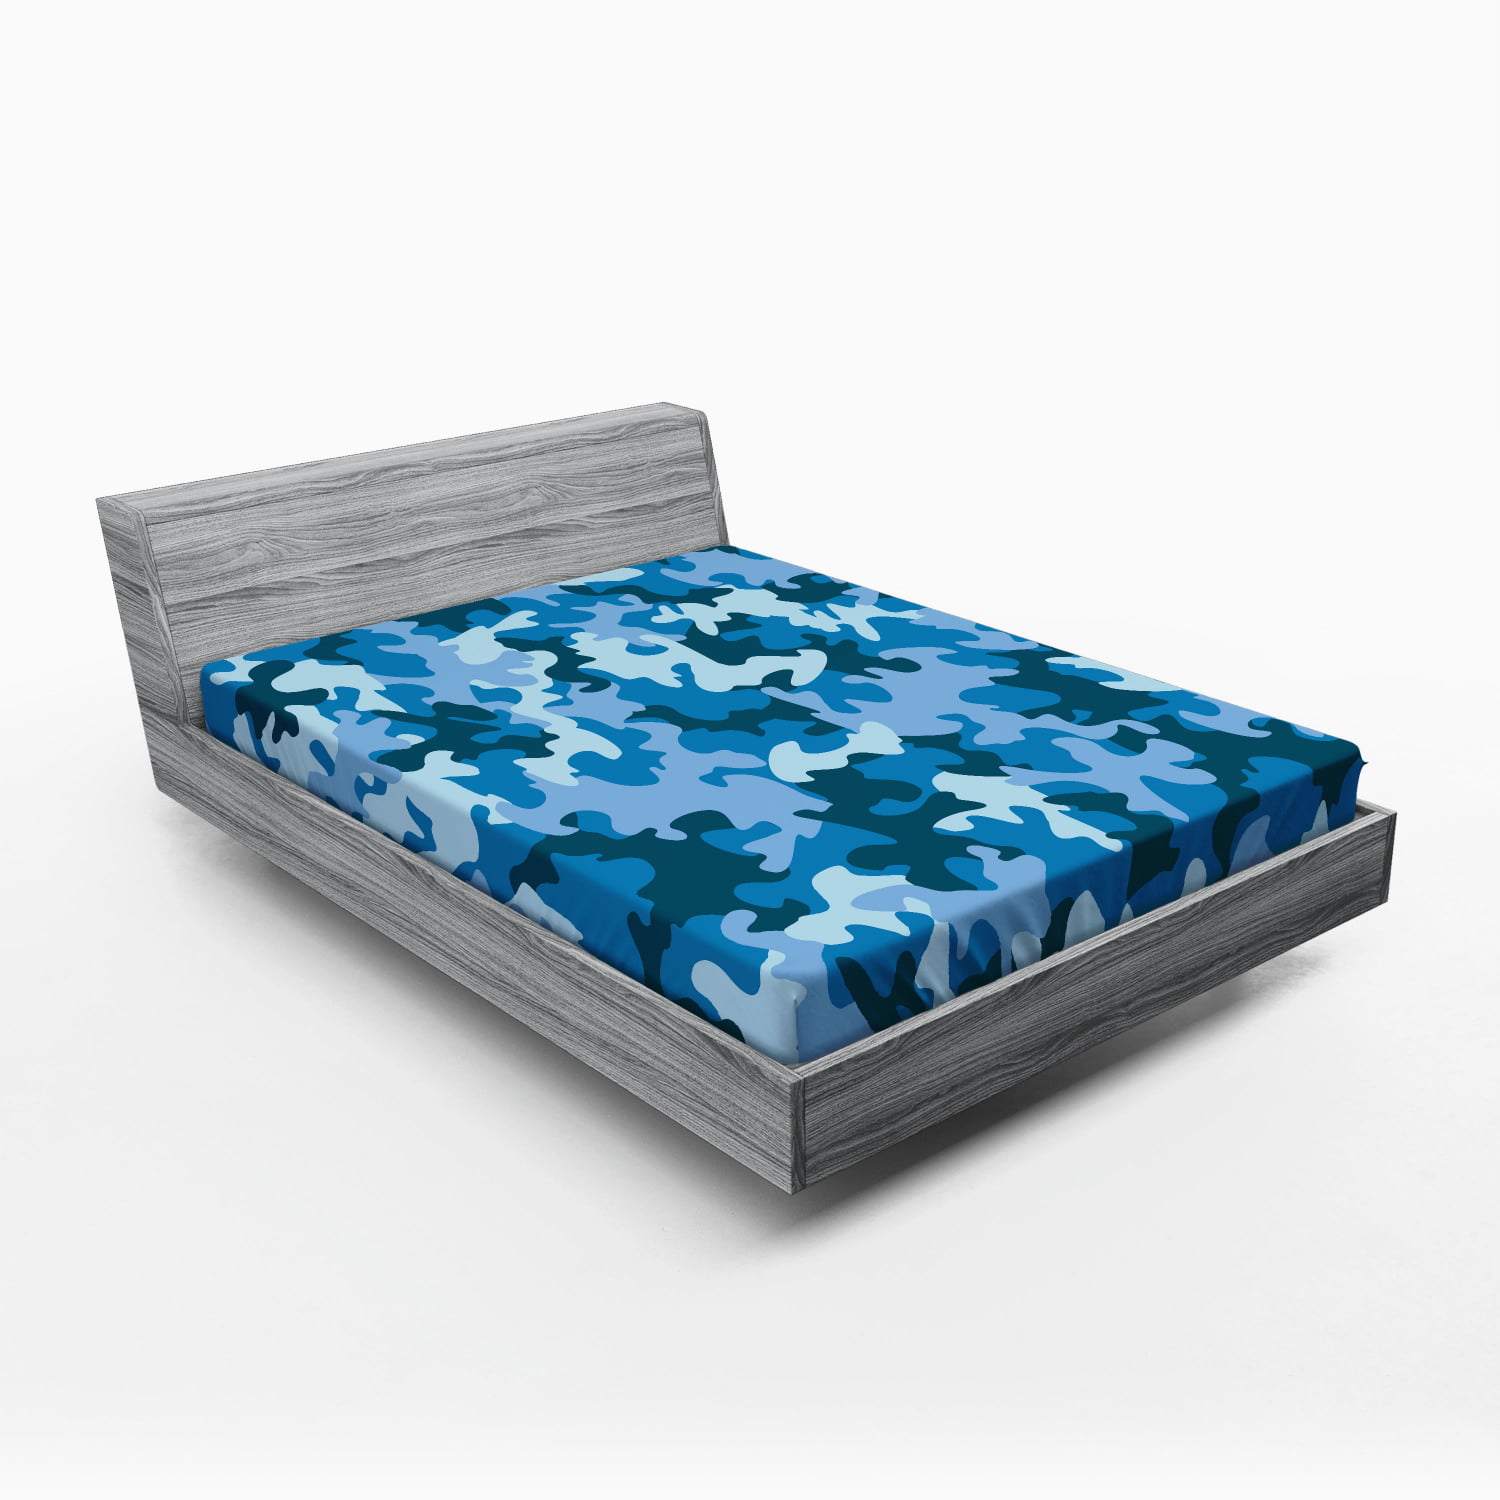 Blue and Pale Blue Twin Size Soft Comfortable Top Sheet Decorative Bedding 1 Piece Ambesonne Camo Flat Sheet Colorful Composition with Abstract Shapes in Sky Color Shades Dark Motifs